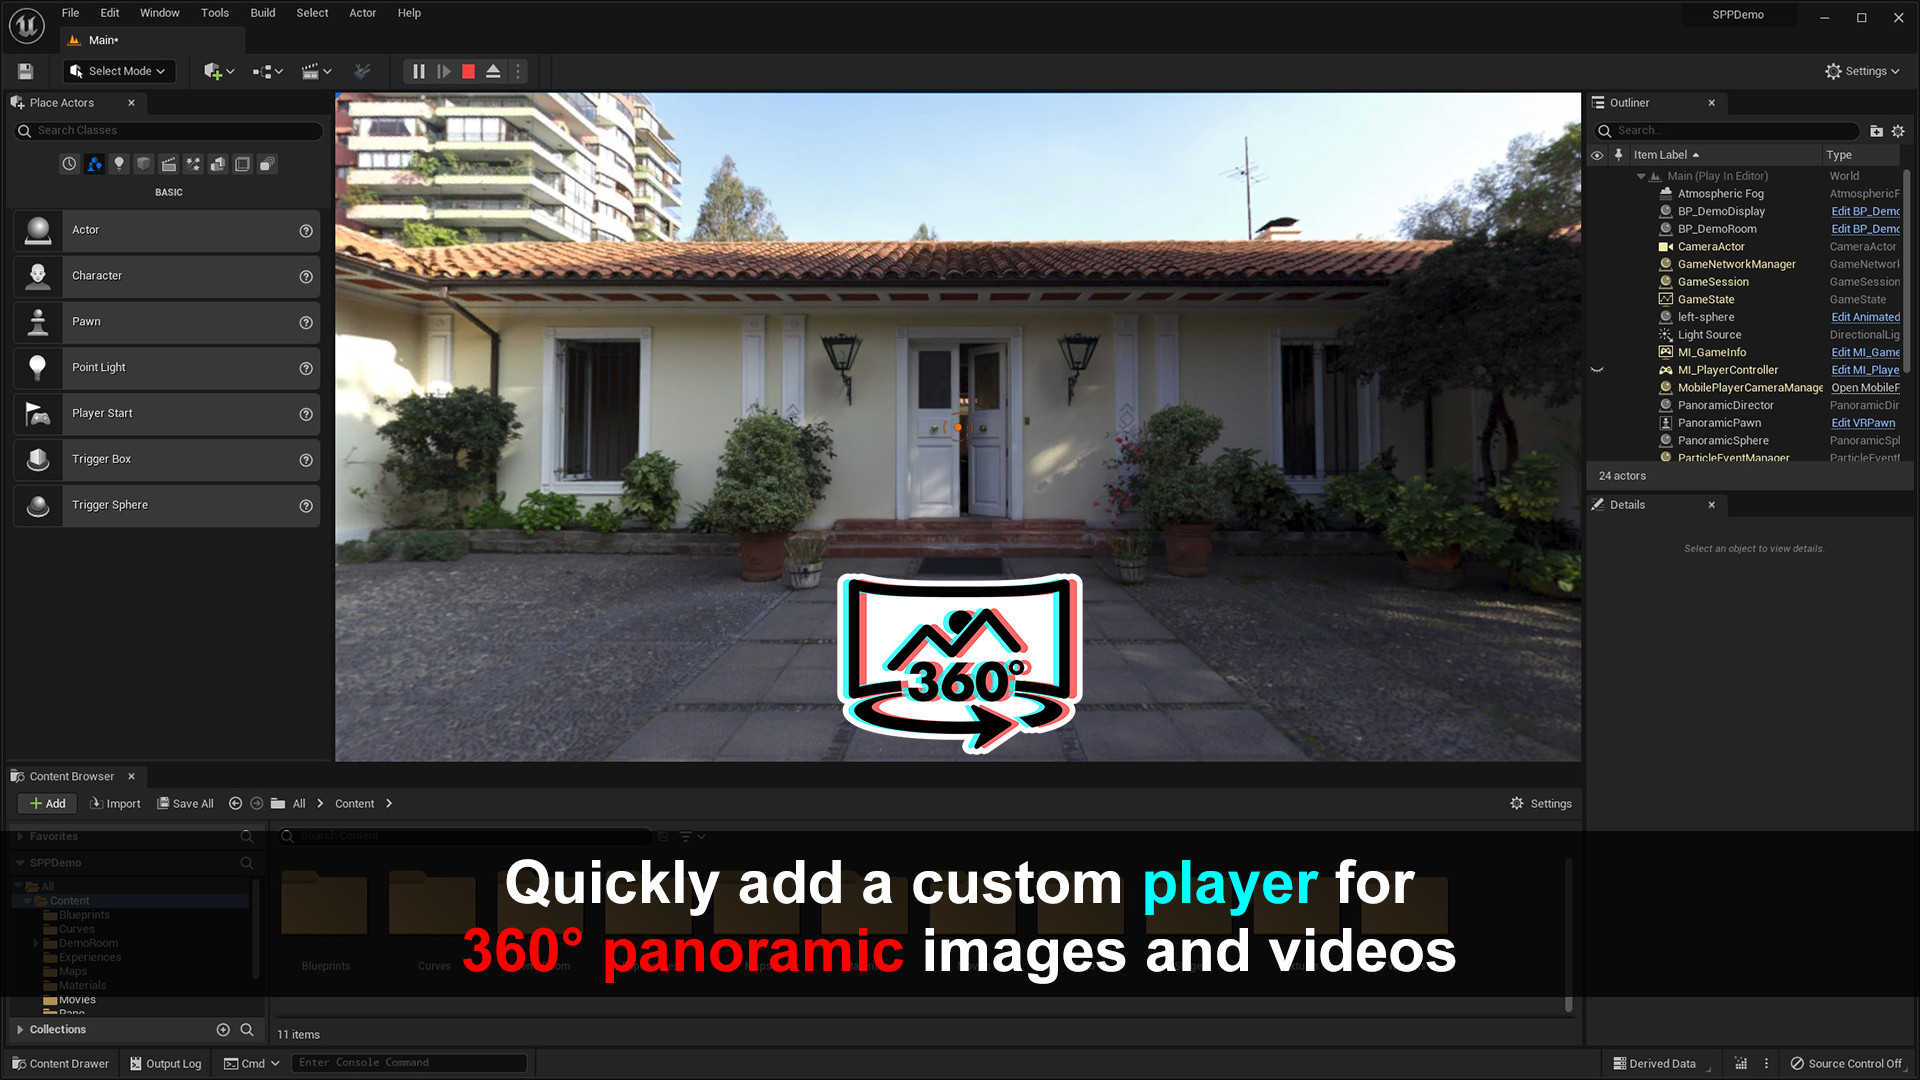 Quickly integrate an interactive, customizable player for 360° panoramic images and videos